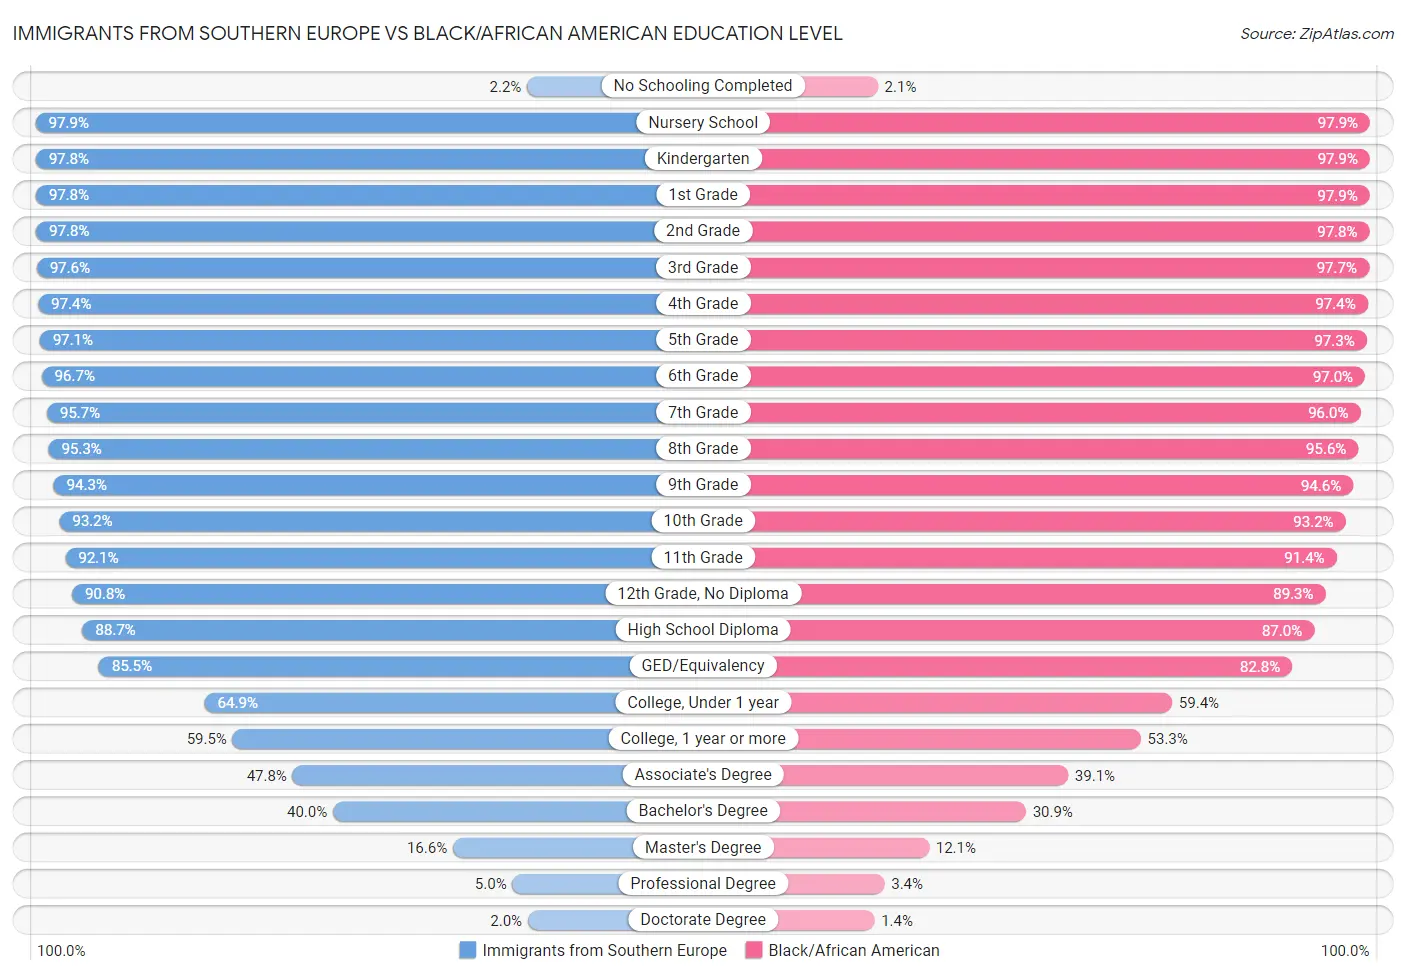 Immigrants from Southern Europe vs Black/African American Education Level